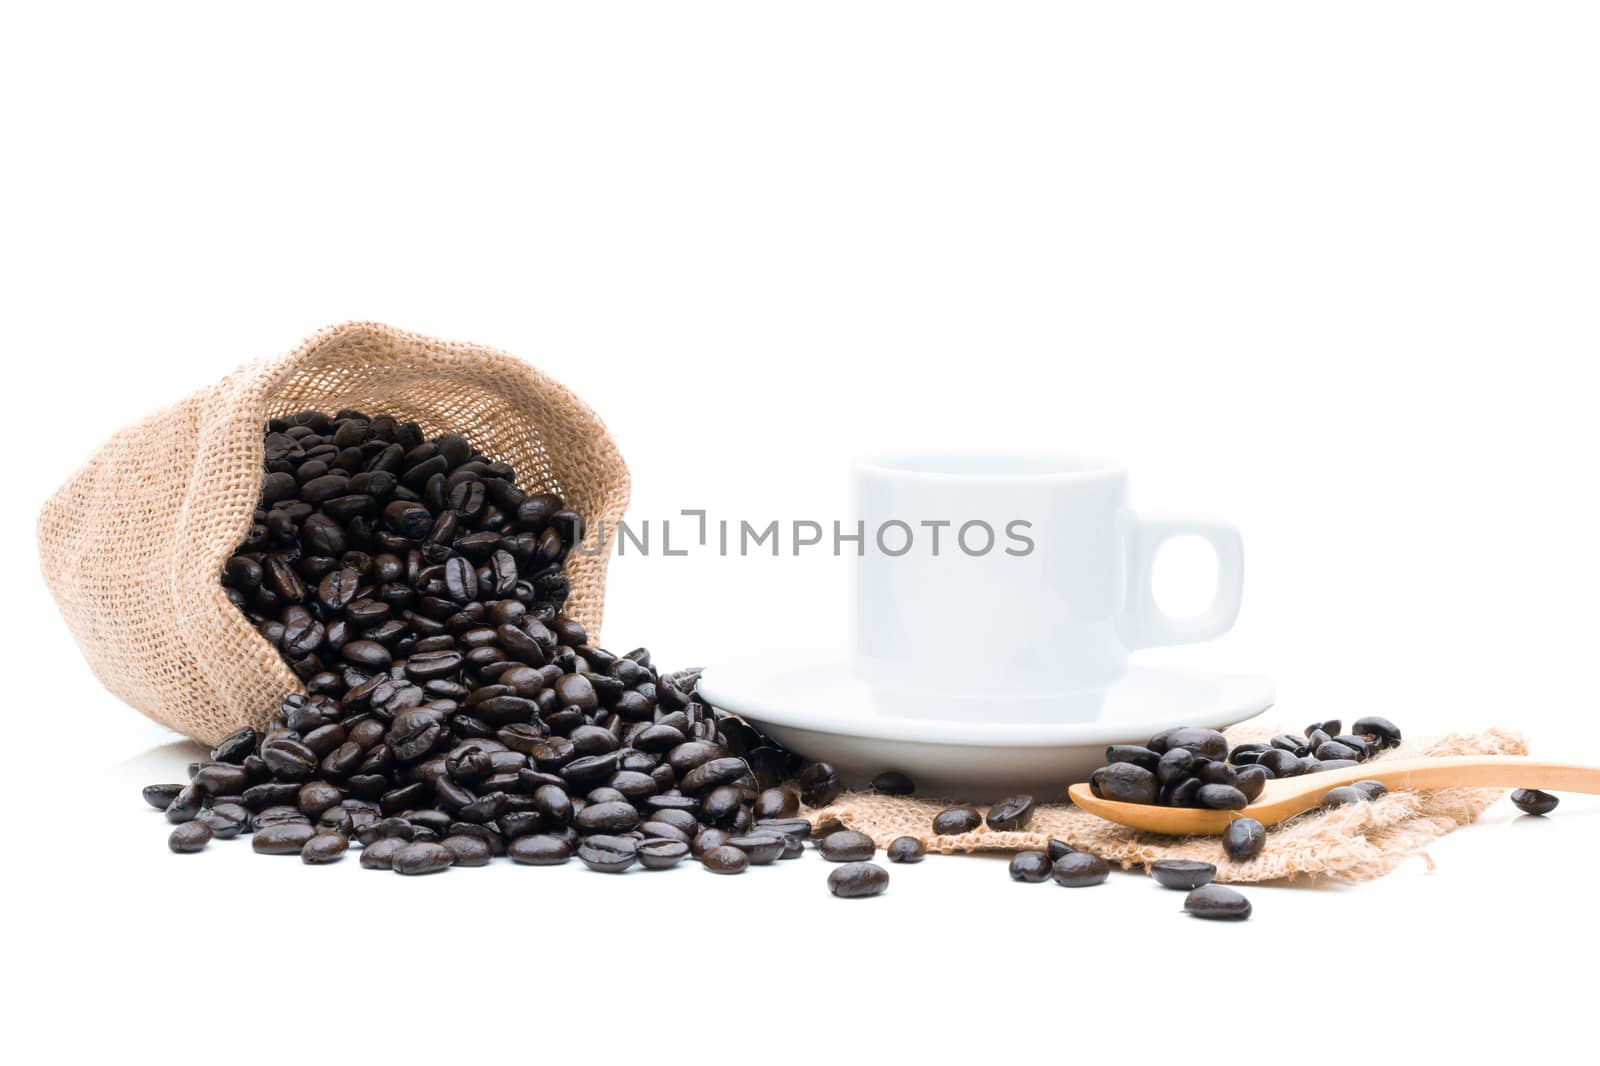 Roasted coffee beans in a sack of cloth on a white background by sompongtom